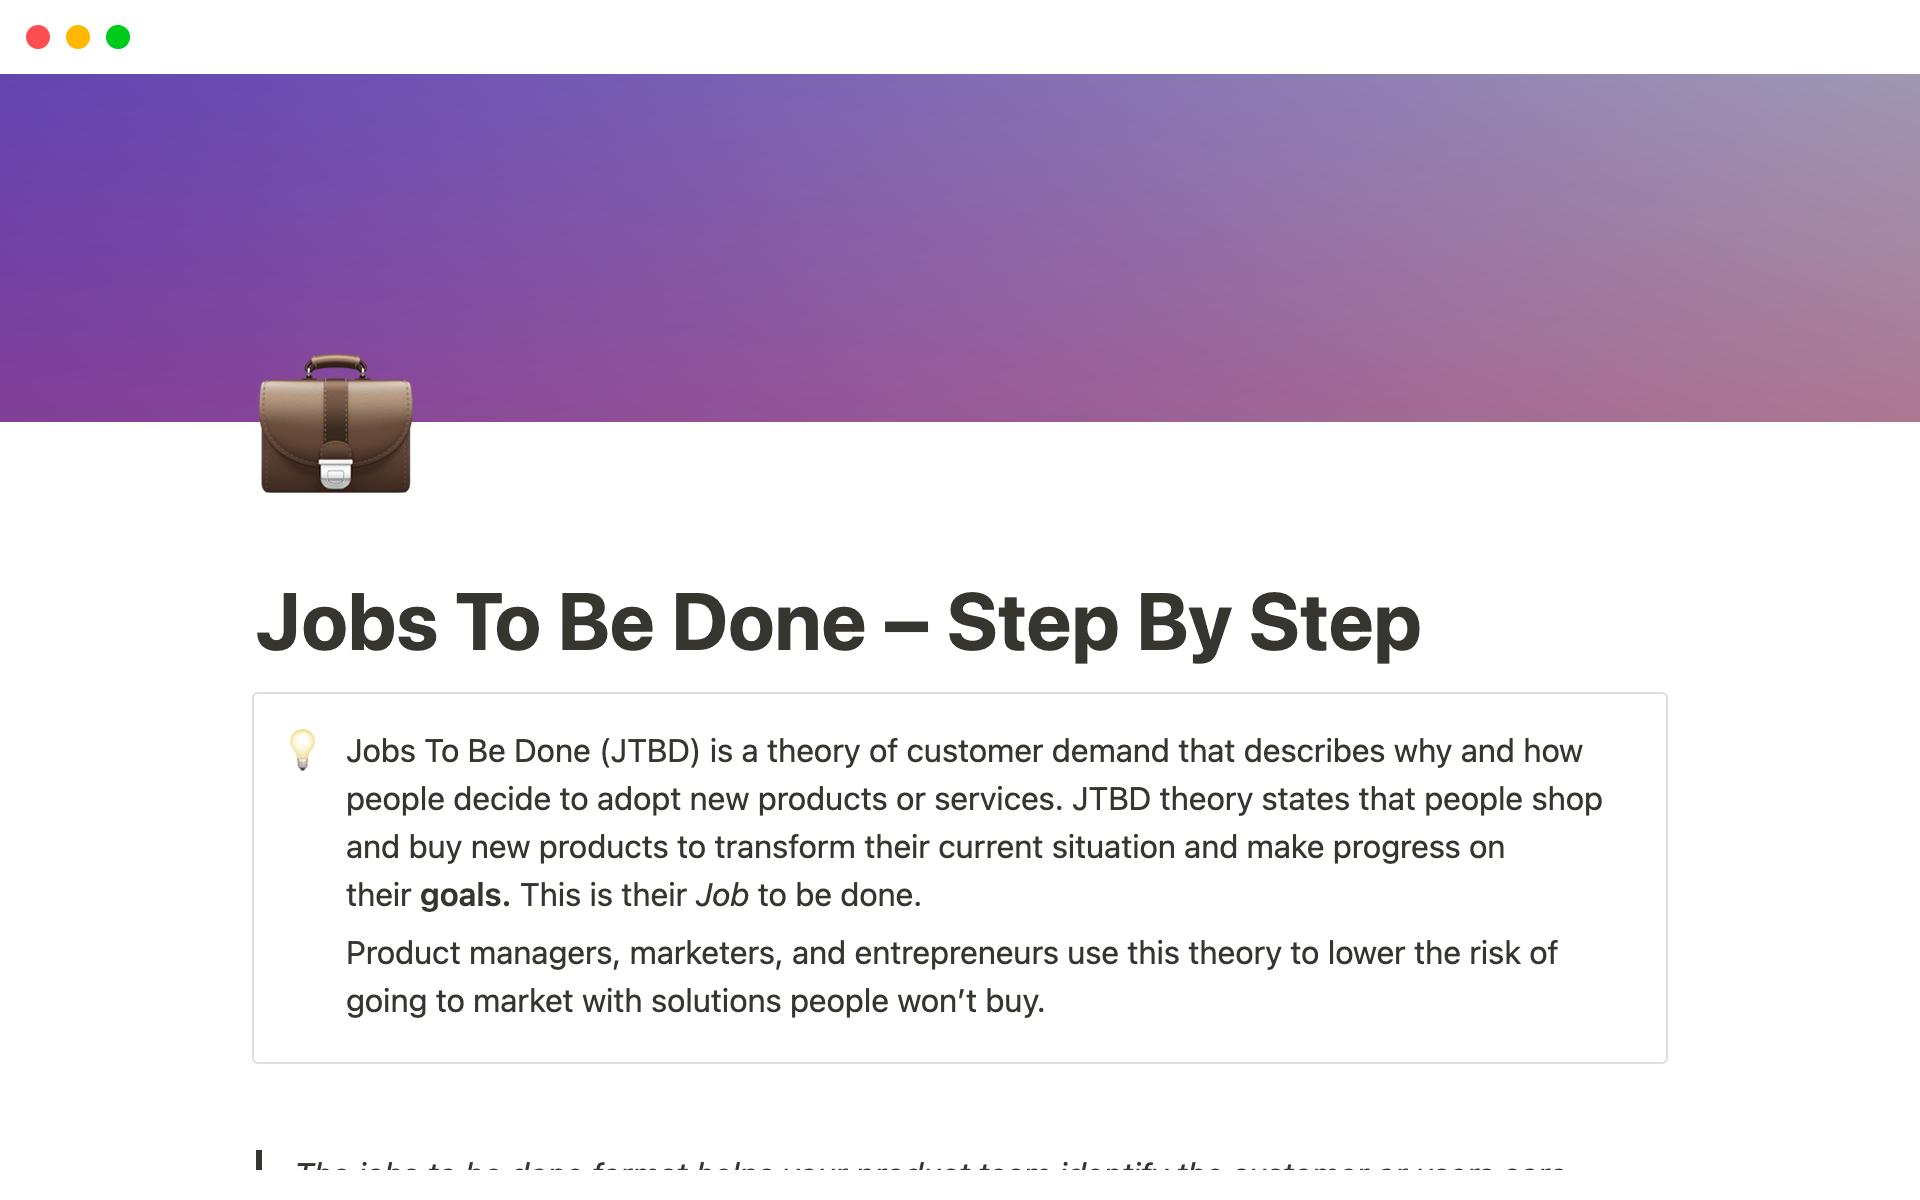 An easy to use, step-by-step, guide on how to apply the Jobs to Be Done (JTBD) Framework.